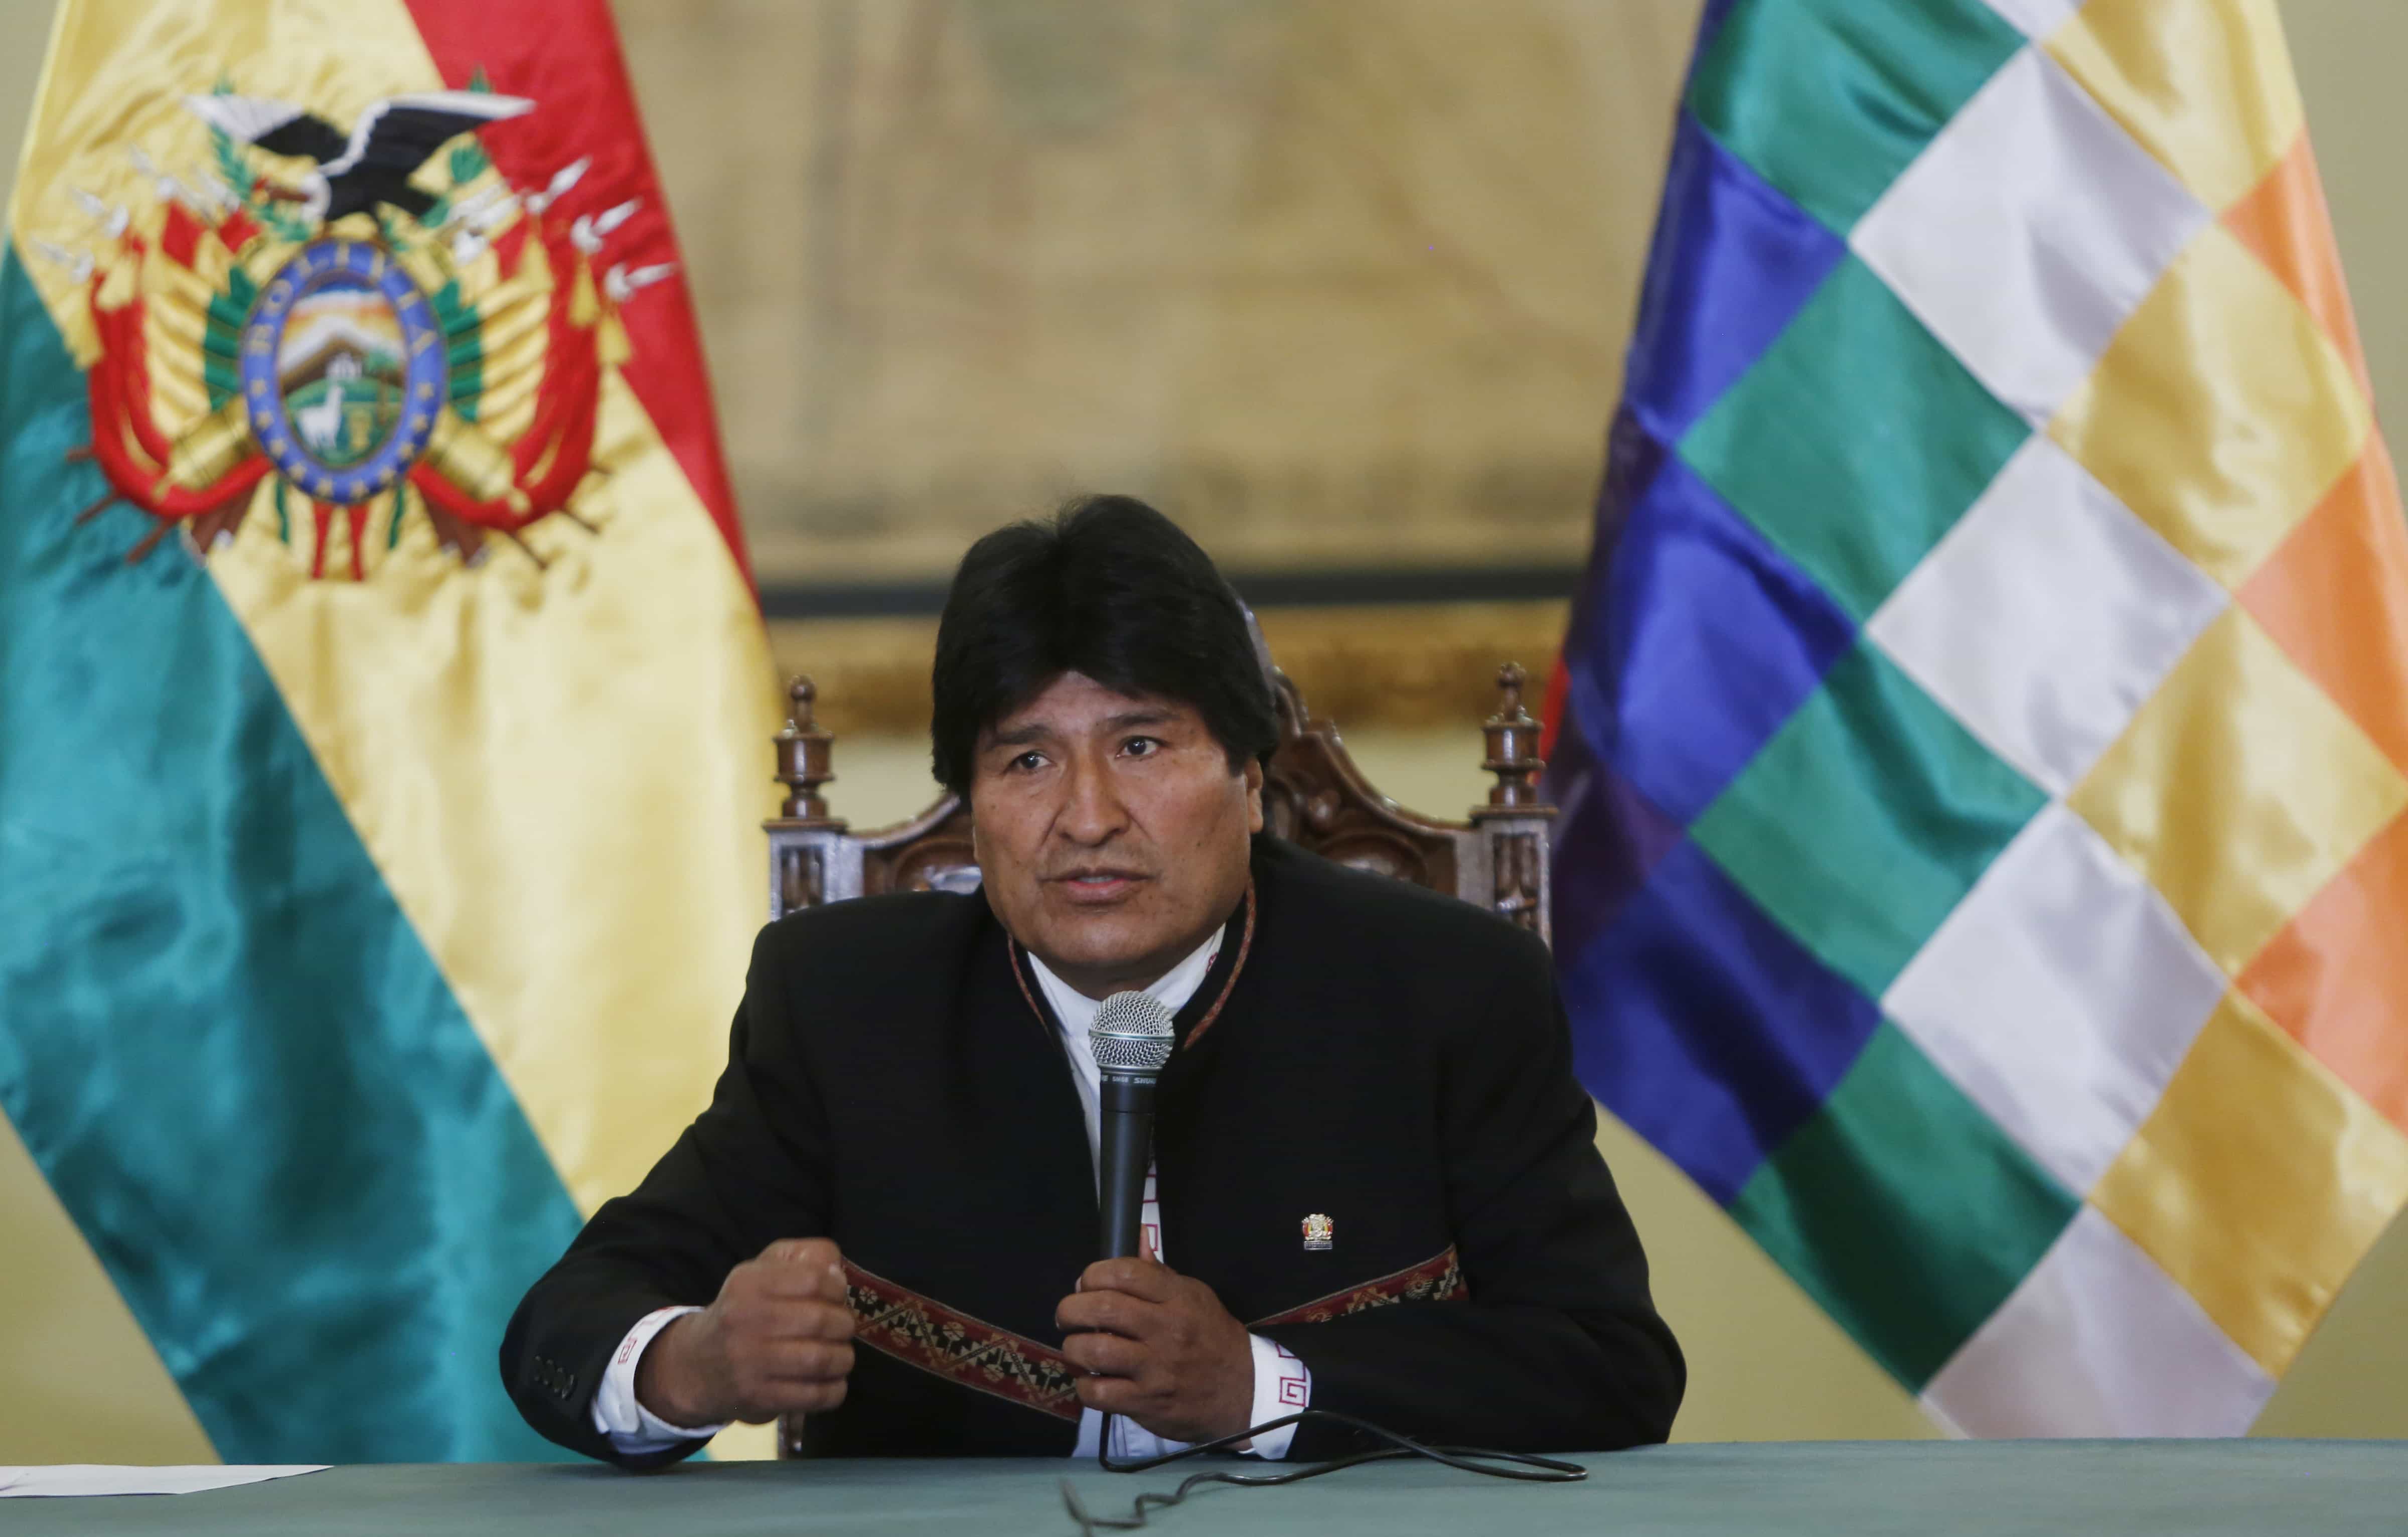 Bolivia's President Evo Morales speaks during a press conference at the government palace in La Paz, Bolivia, February 2016, AP Photo/Juan Karita